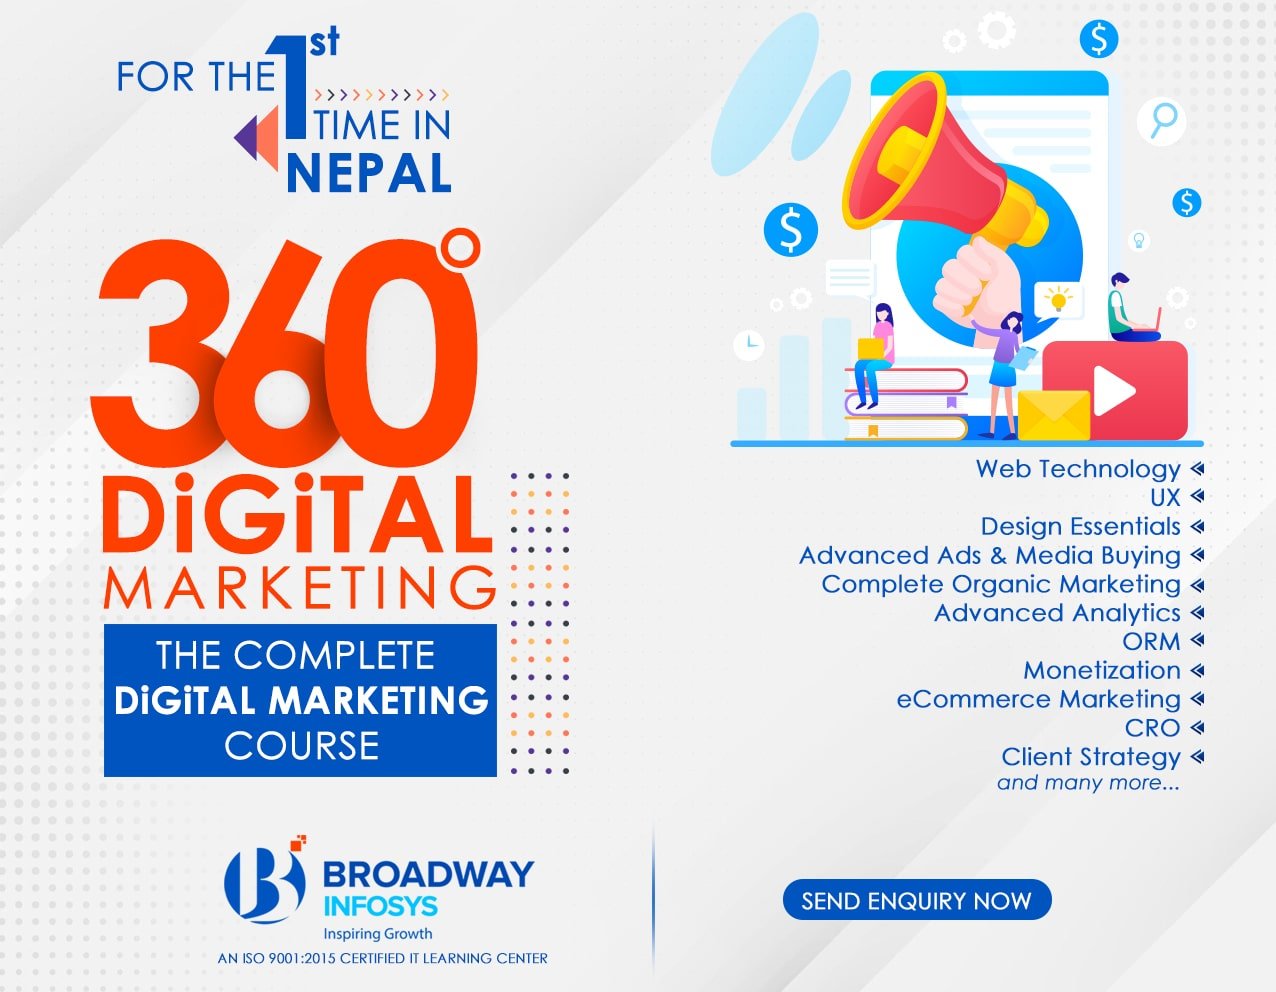 Broadway Infosys has launched the first-ever Digital Marketing 360° course in Nepal!